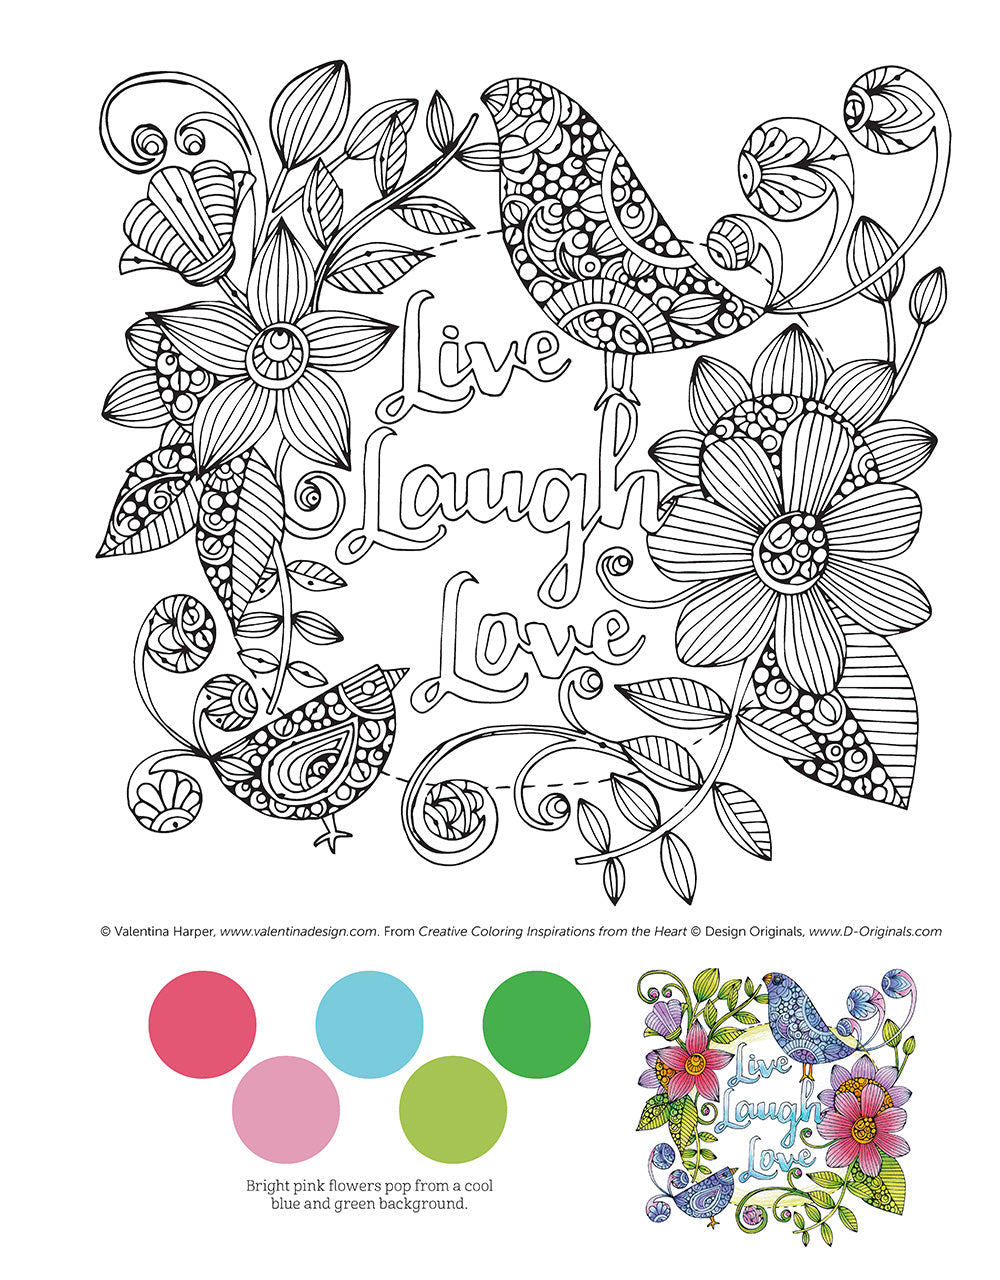 Creative Coloring Inspirations from the Heart